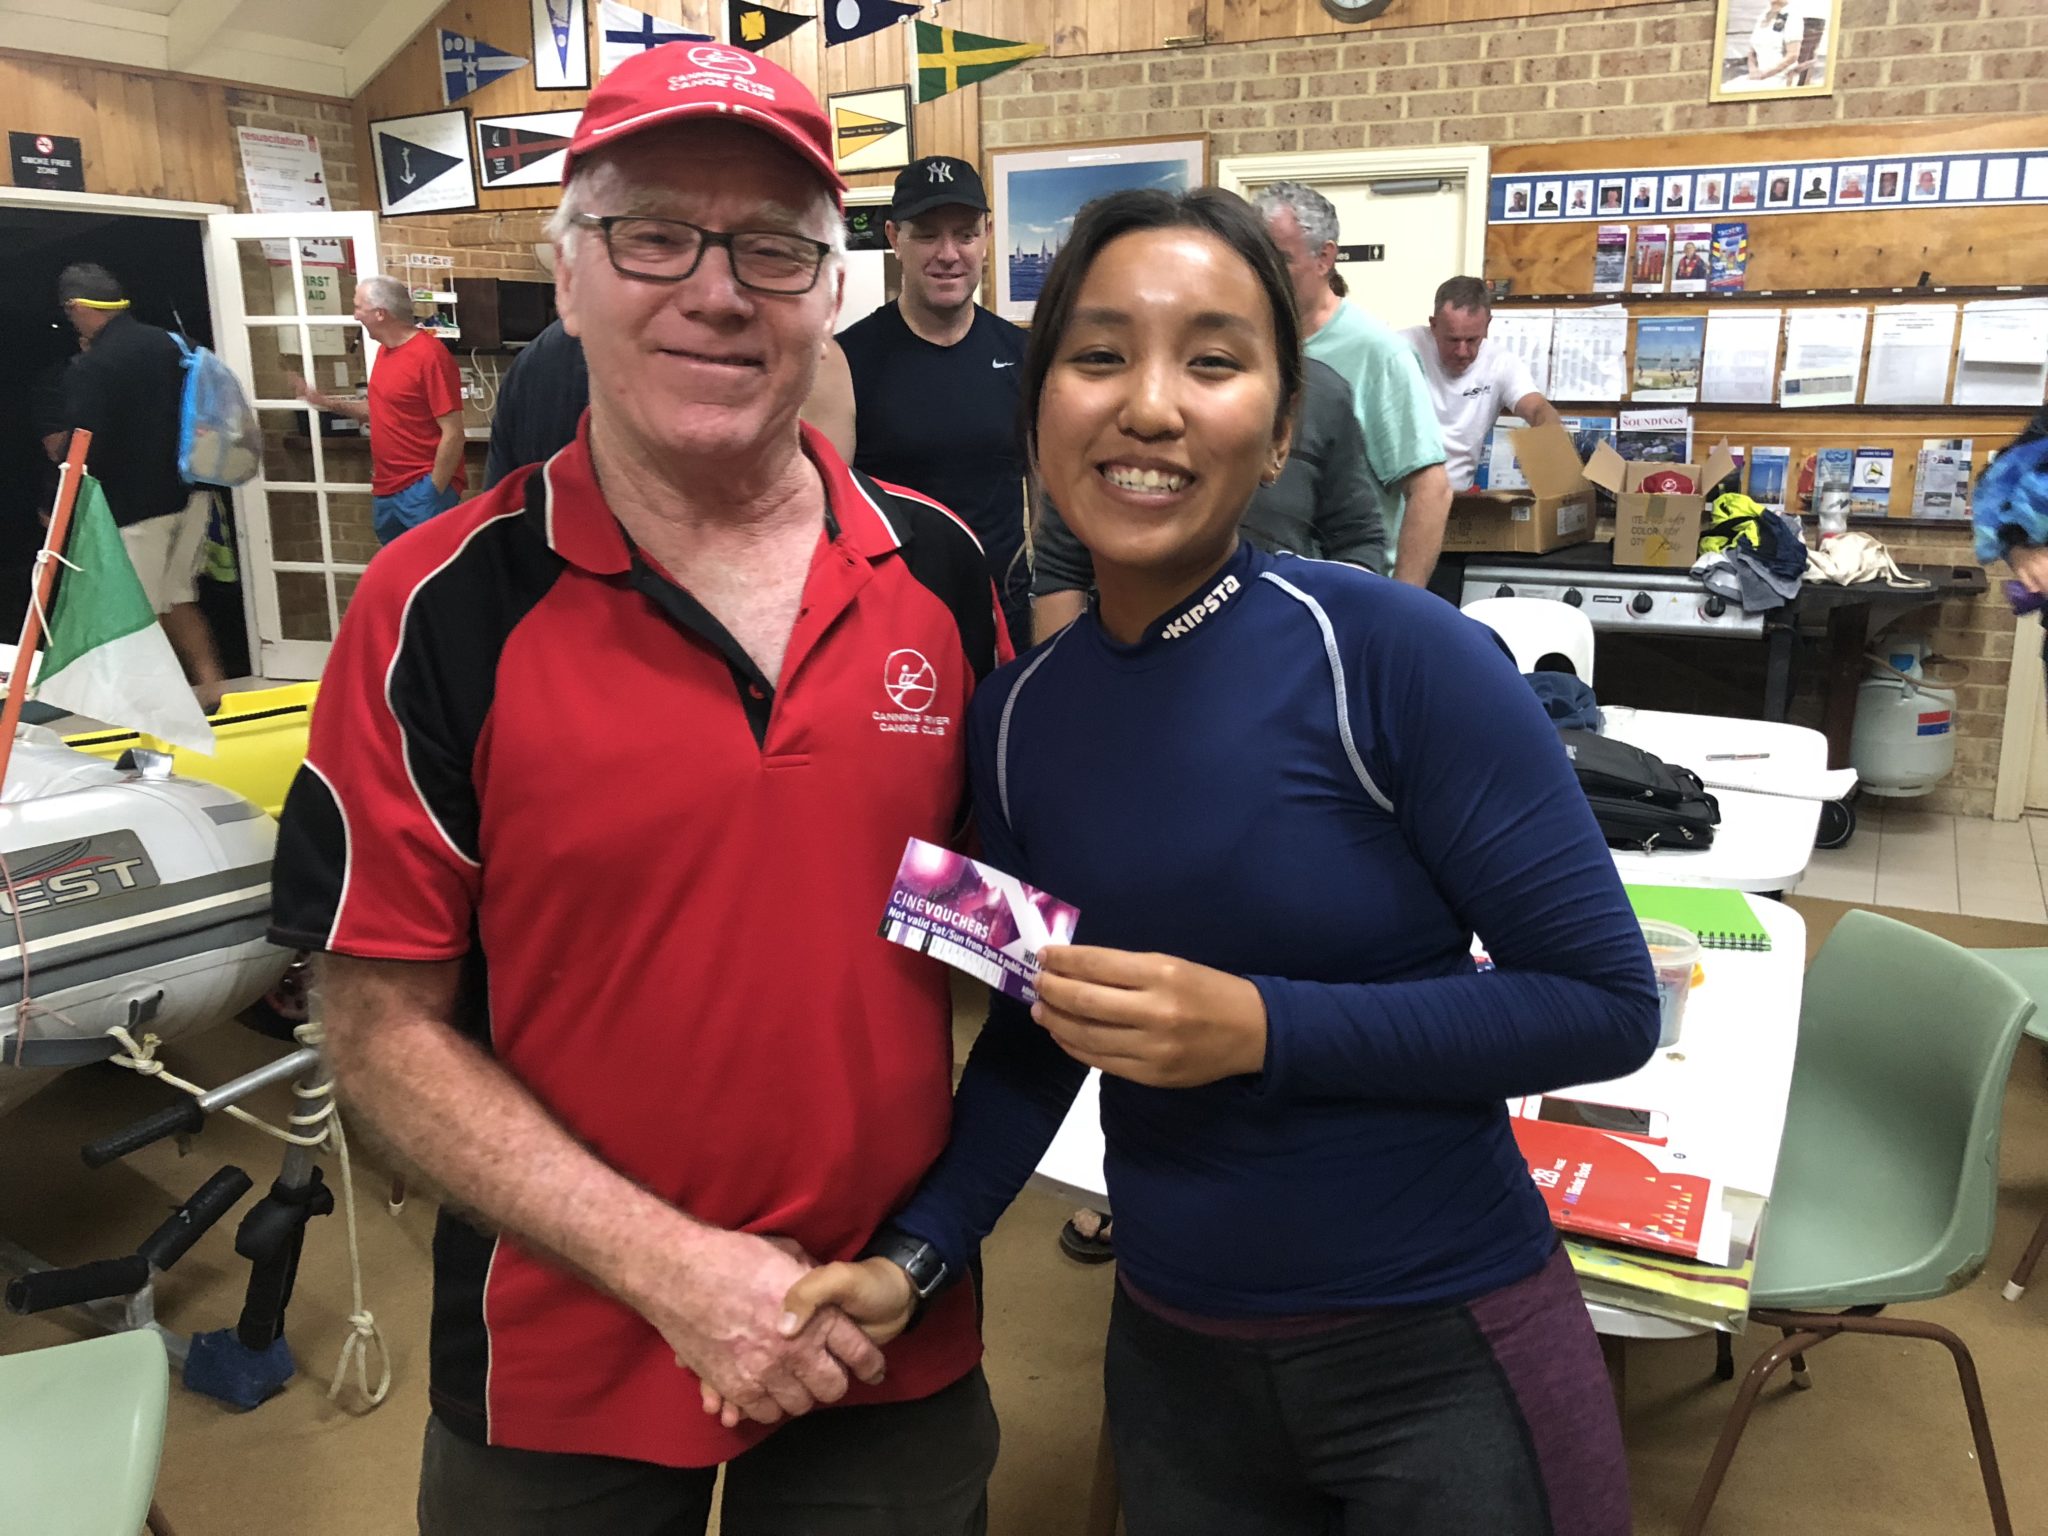 Tues 15th May 2018 : Tonight's photo shows David Gardiner presenting Linnet with a movie voucher